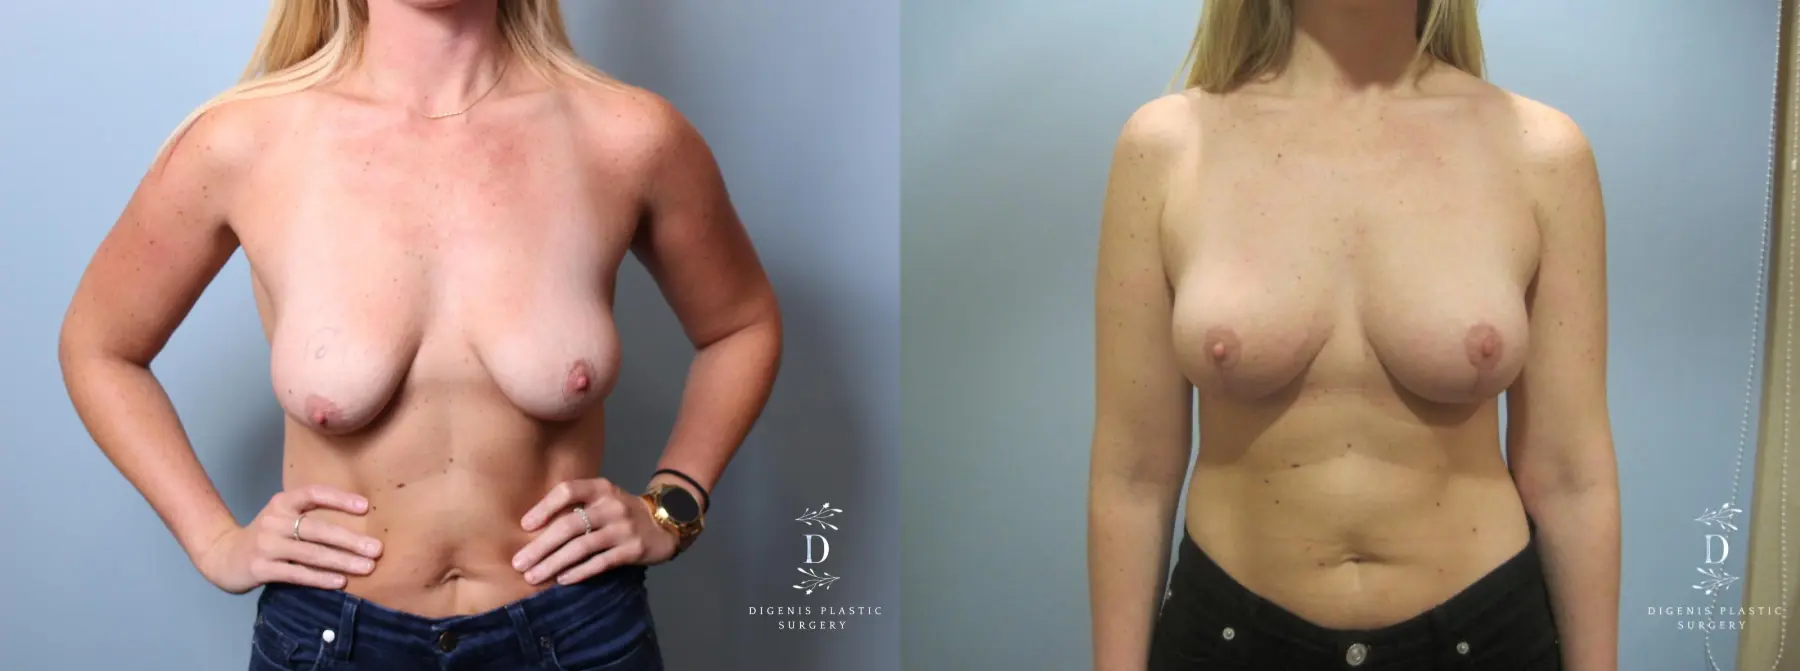 Breast Lift: Patient 7 - Before and After 1